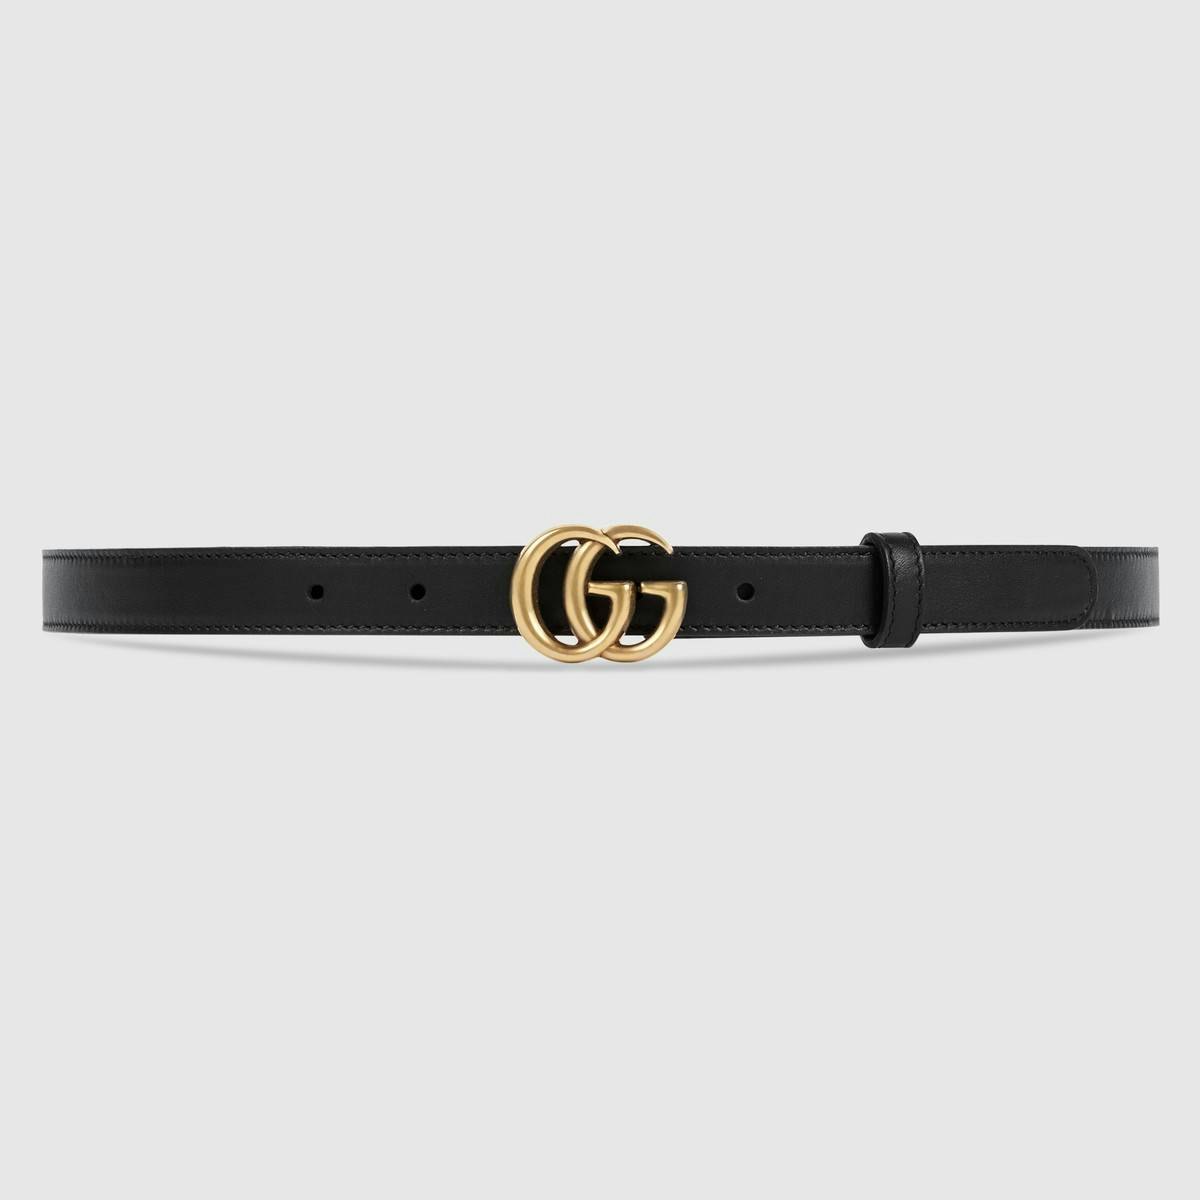 all gucci belts ever made